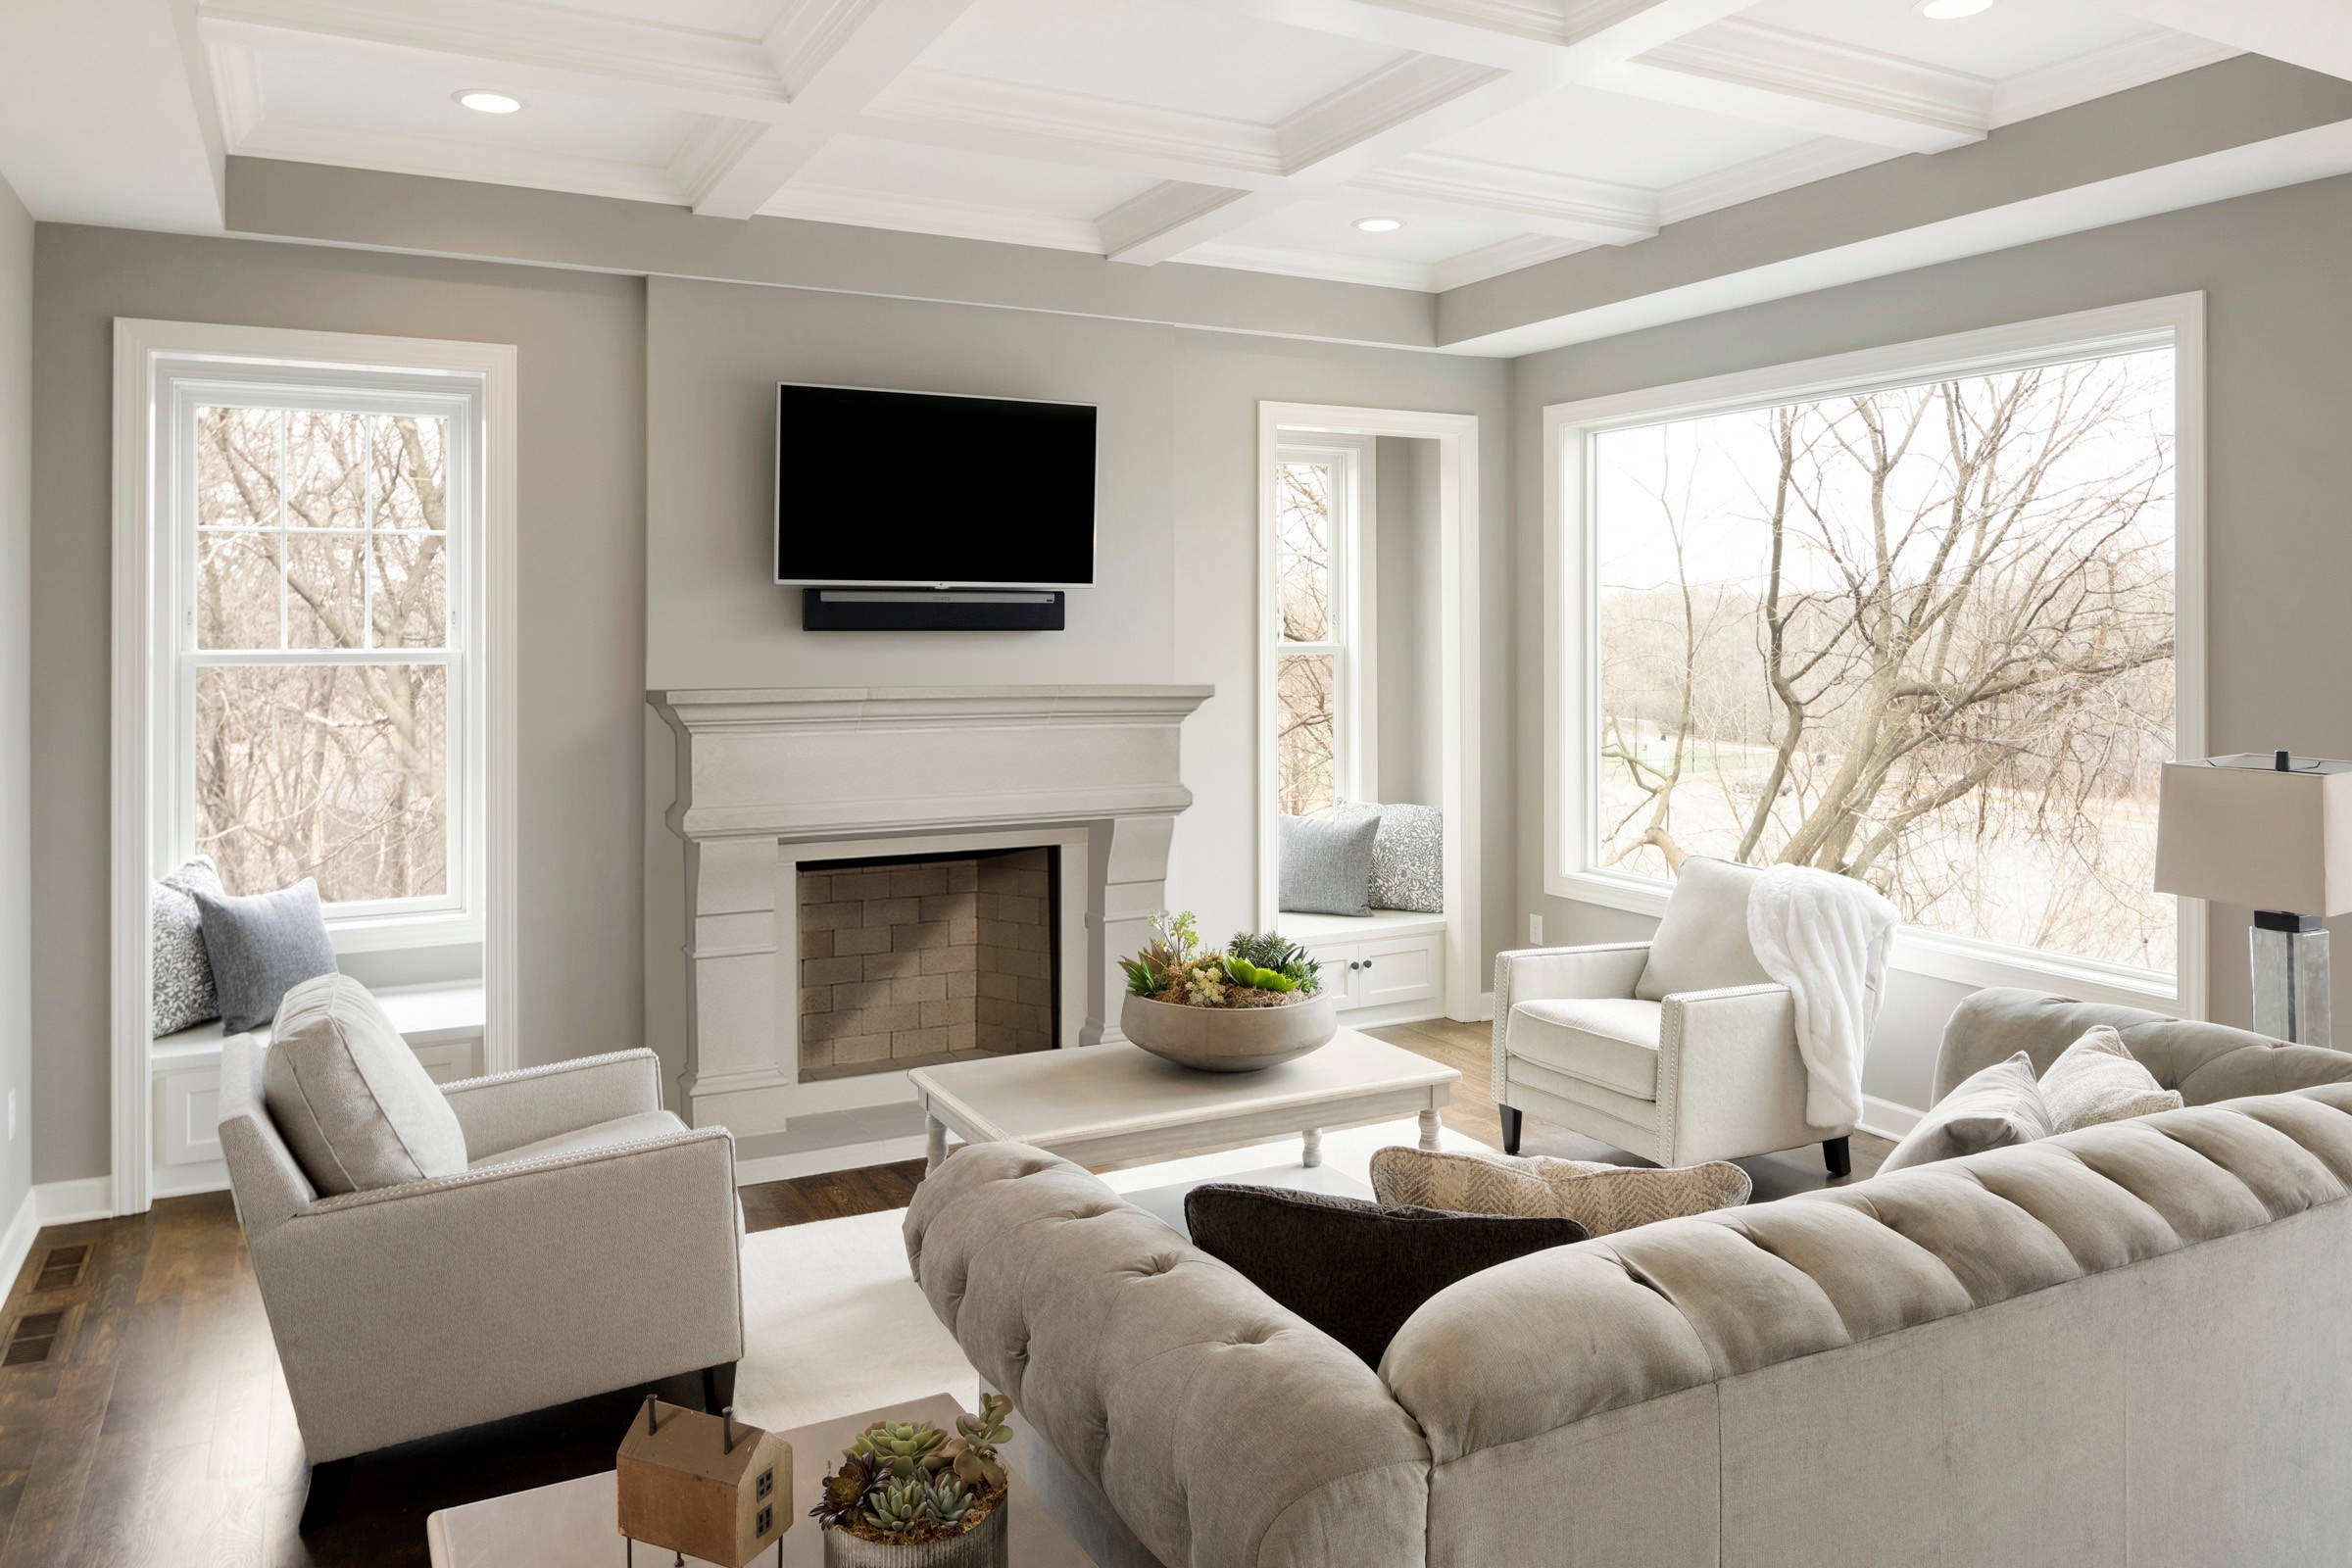 A living room with white furniture and a fireplace mantel.